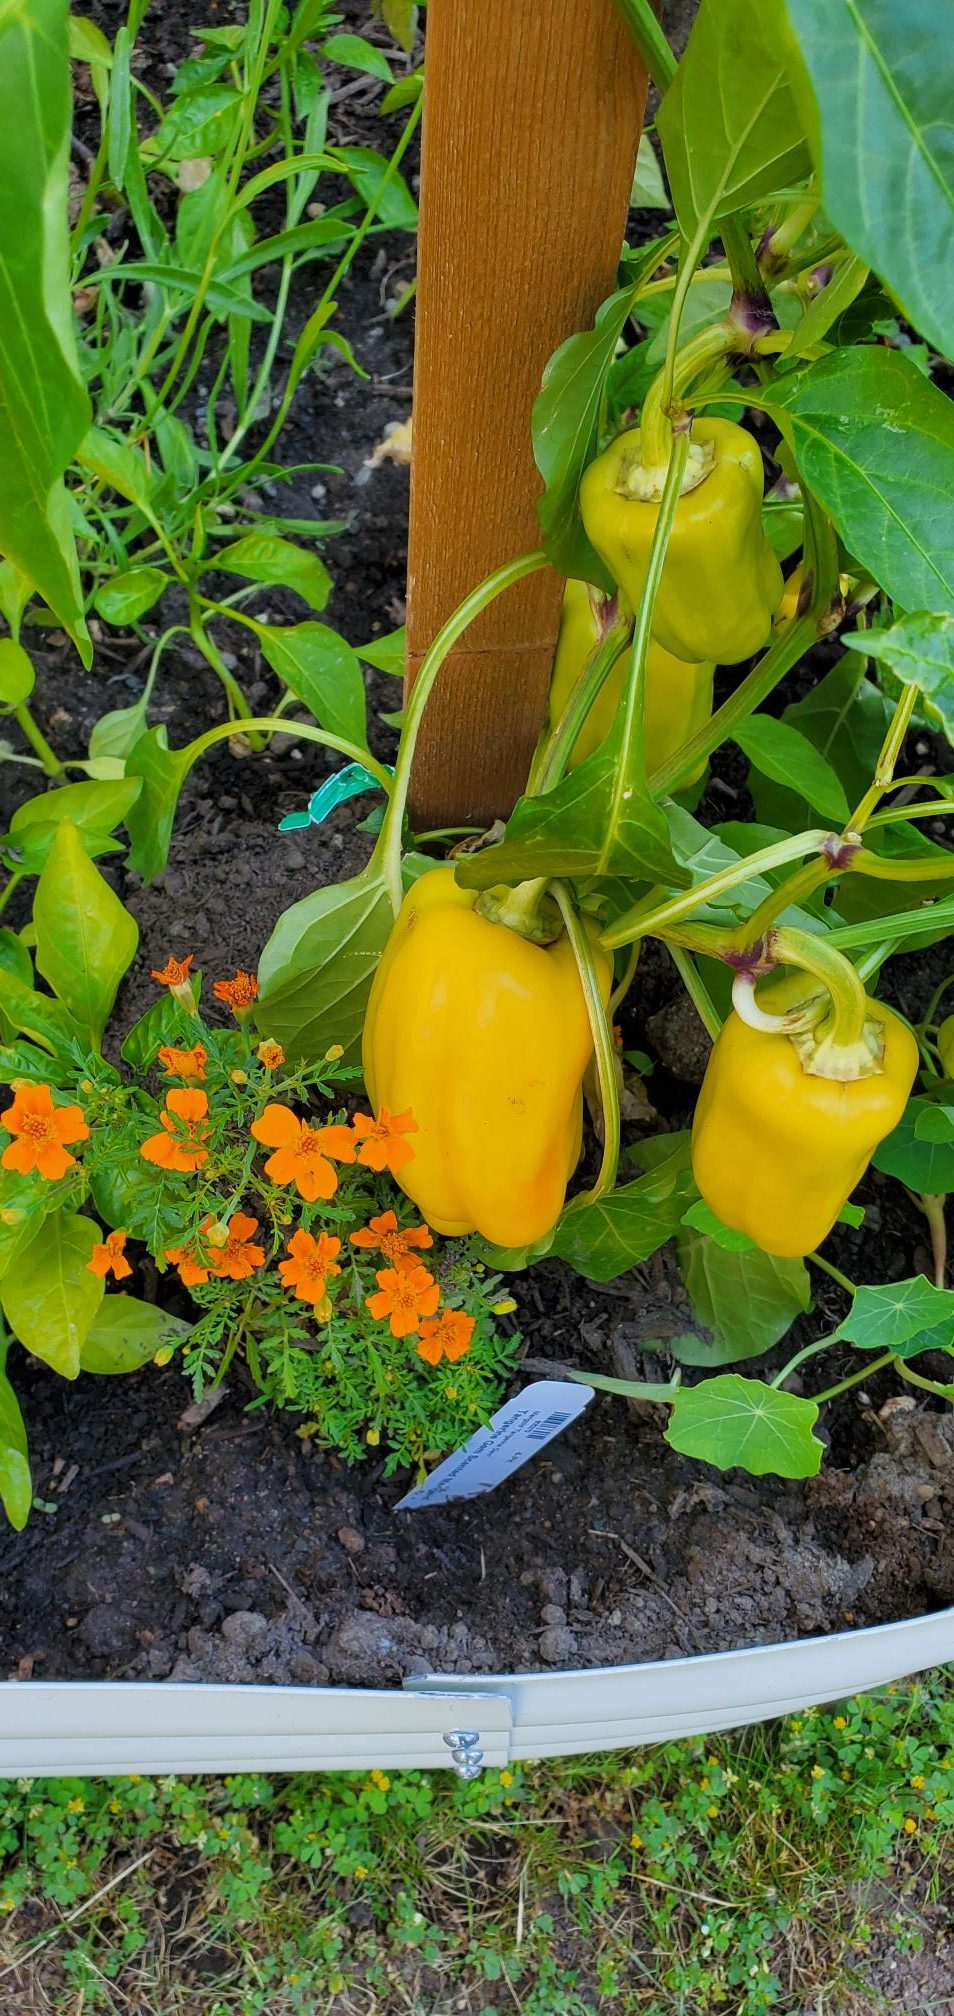 Marigold and orange pepper plants in our backyard homestead.